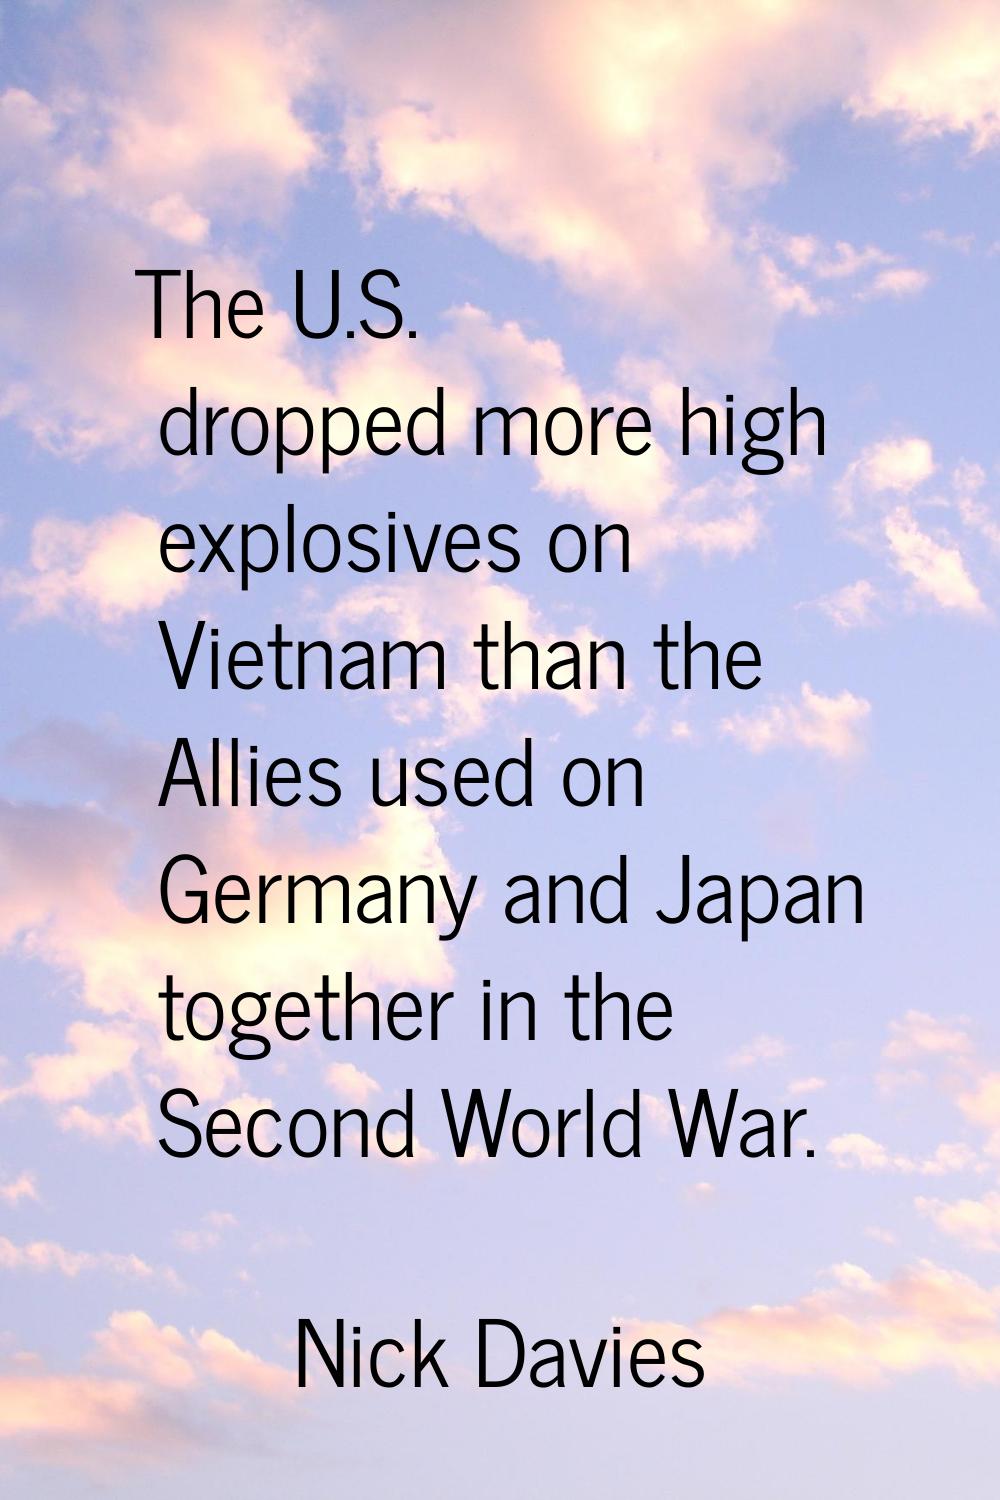 The U.S. dropped more high explosives on Vietnam than the Allies used on Germany and Japan together